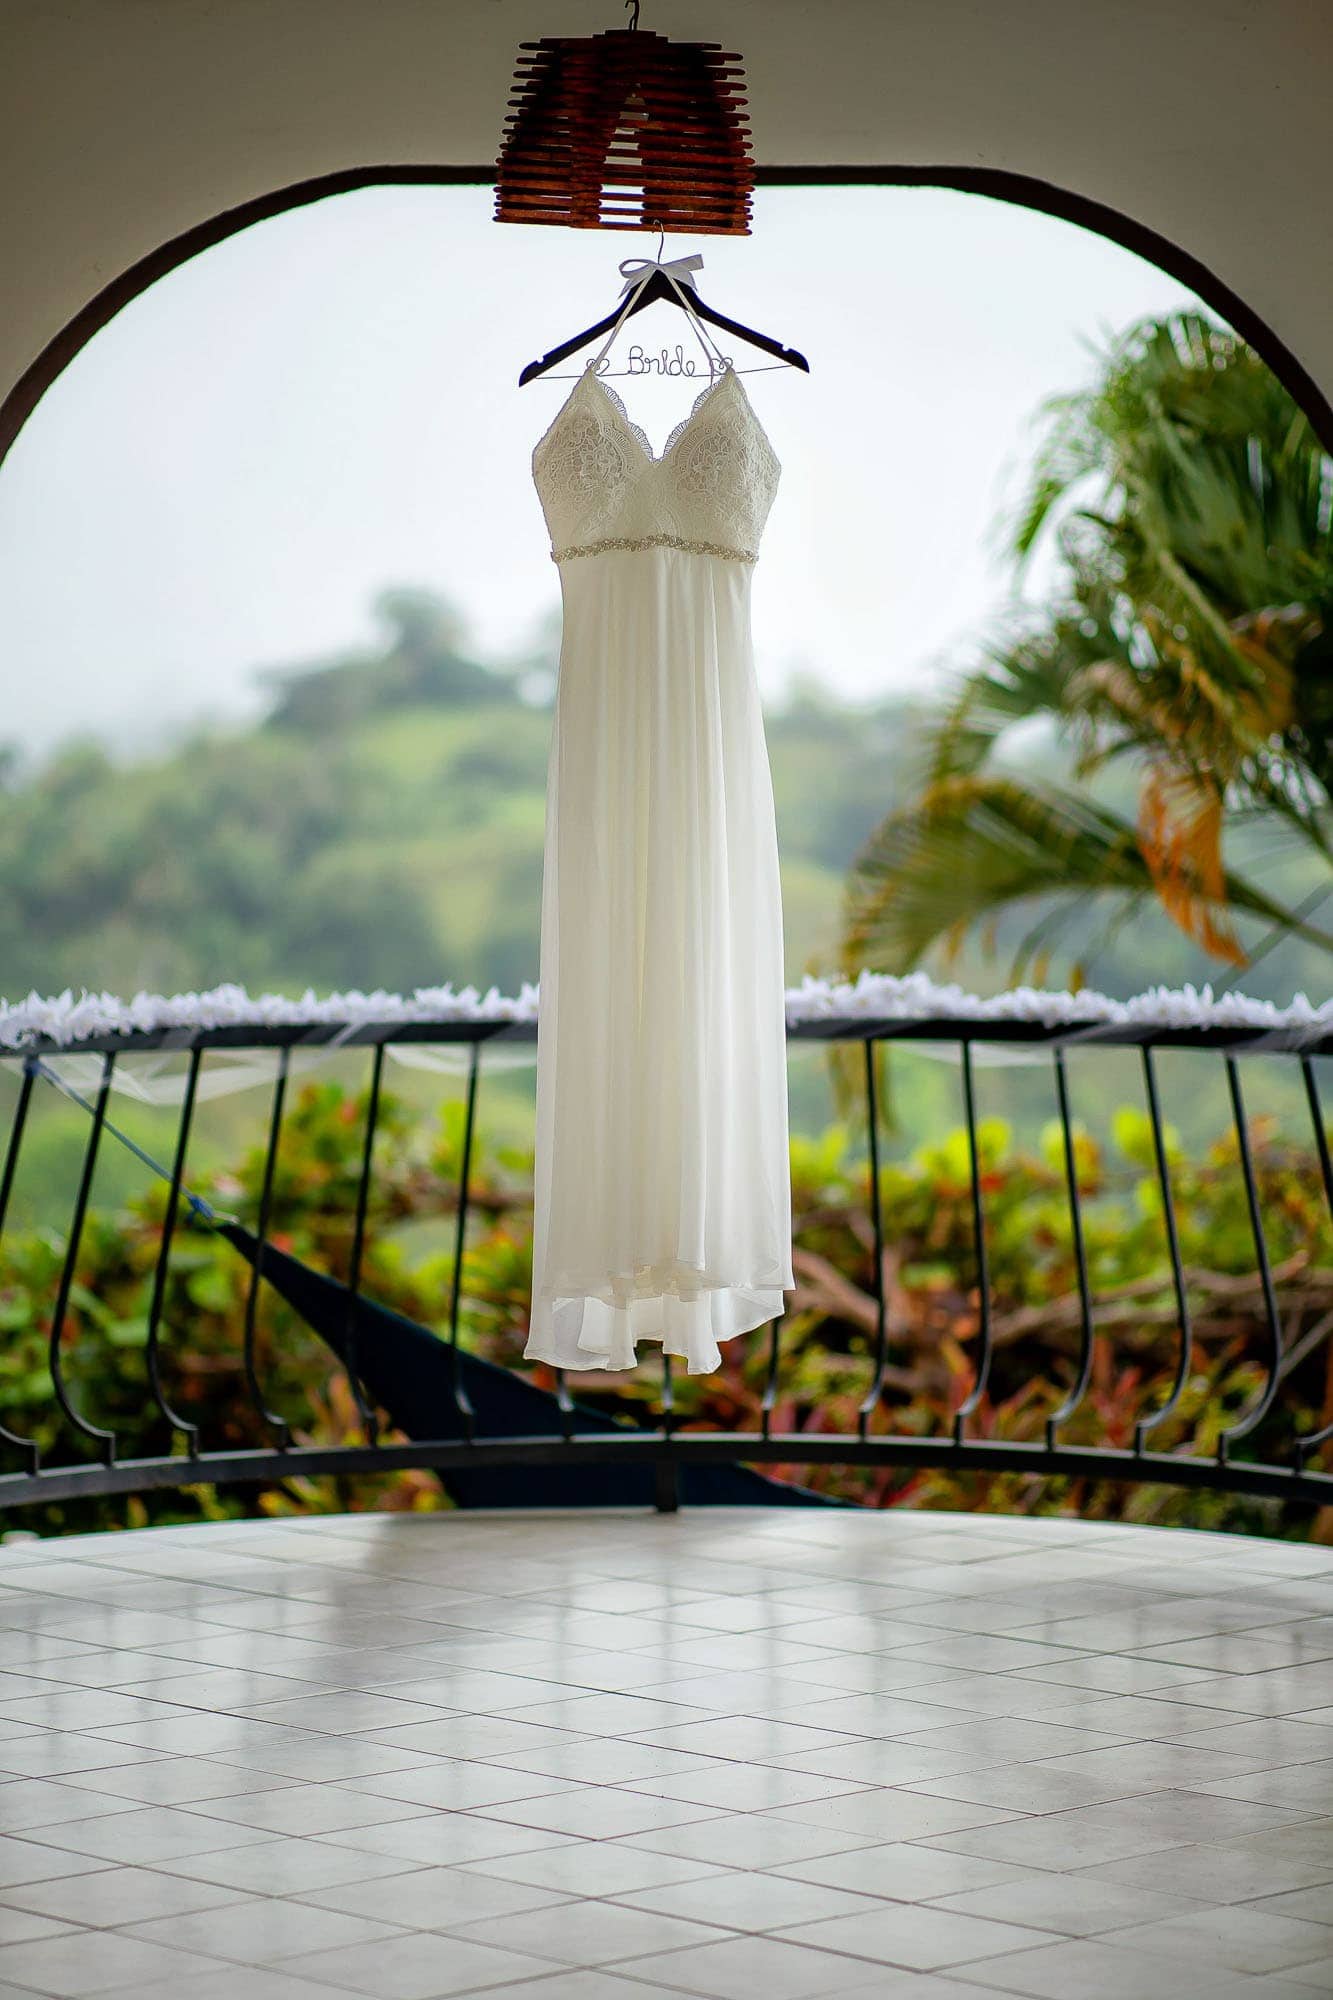 The wedding dress with the view